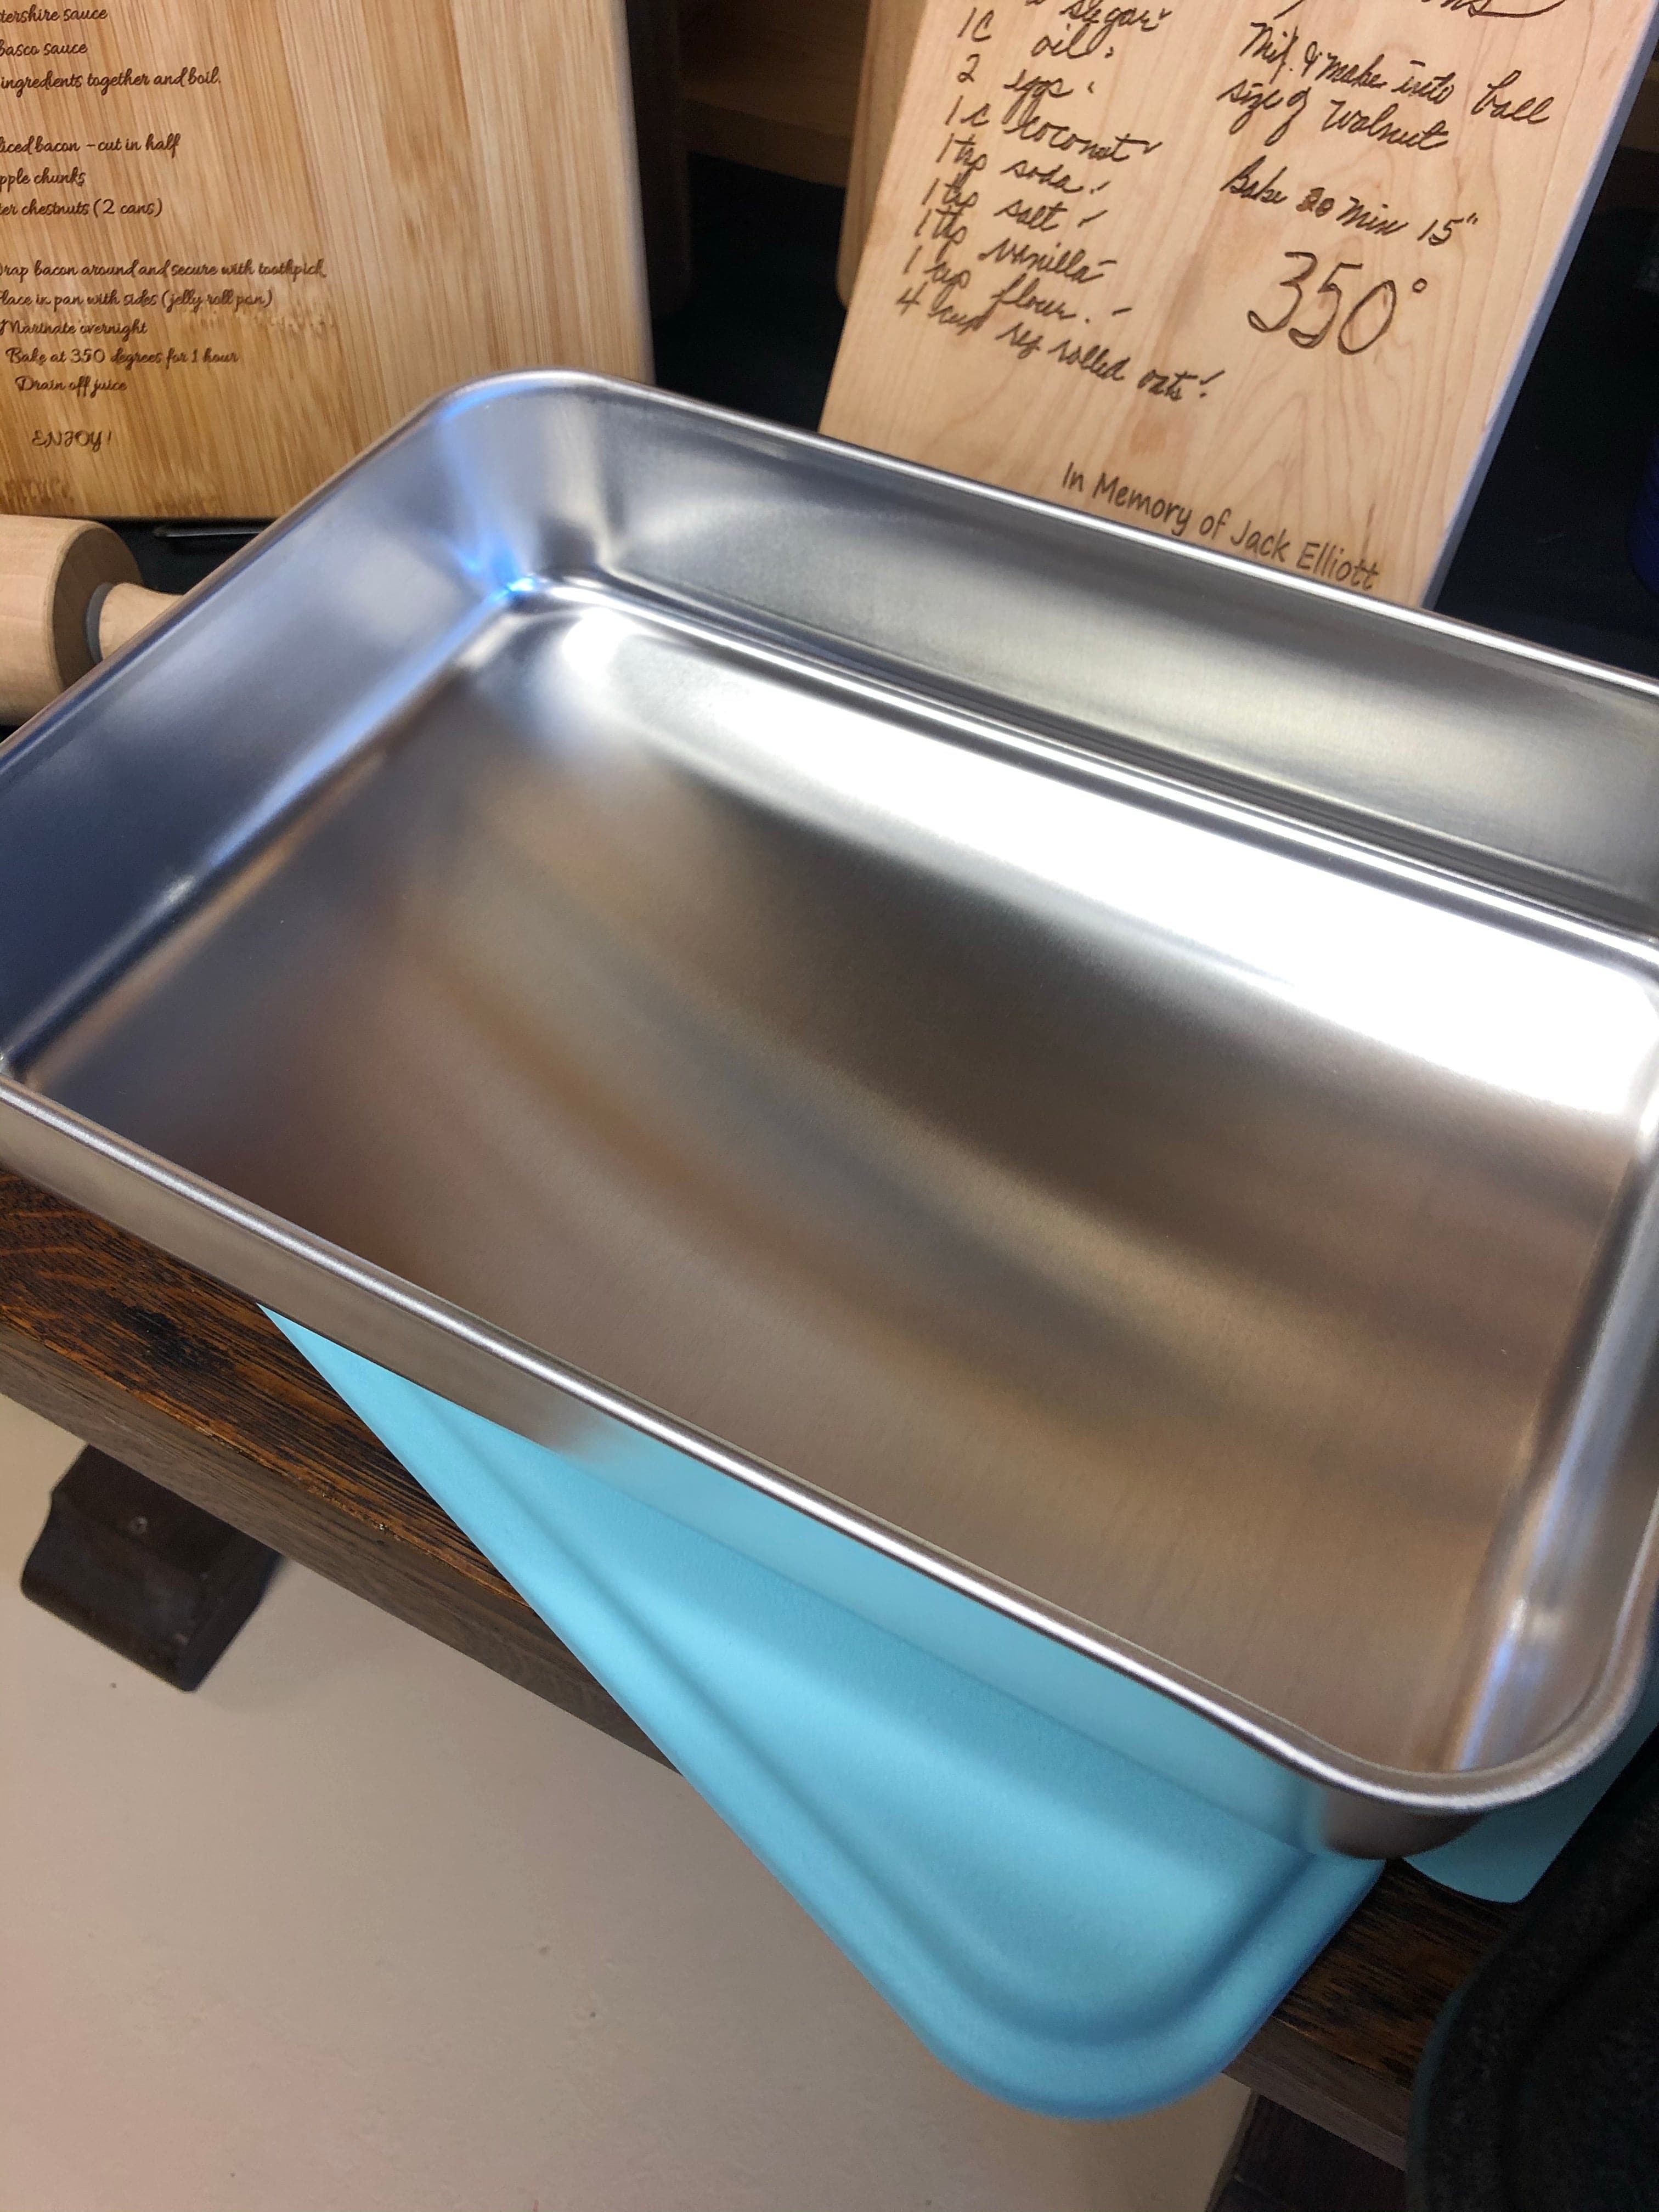 Cake Pan with Engraved Design on Teal Colored Lid - Aluminum 9” x 13